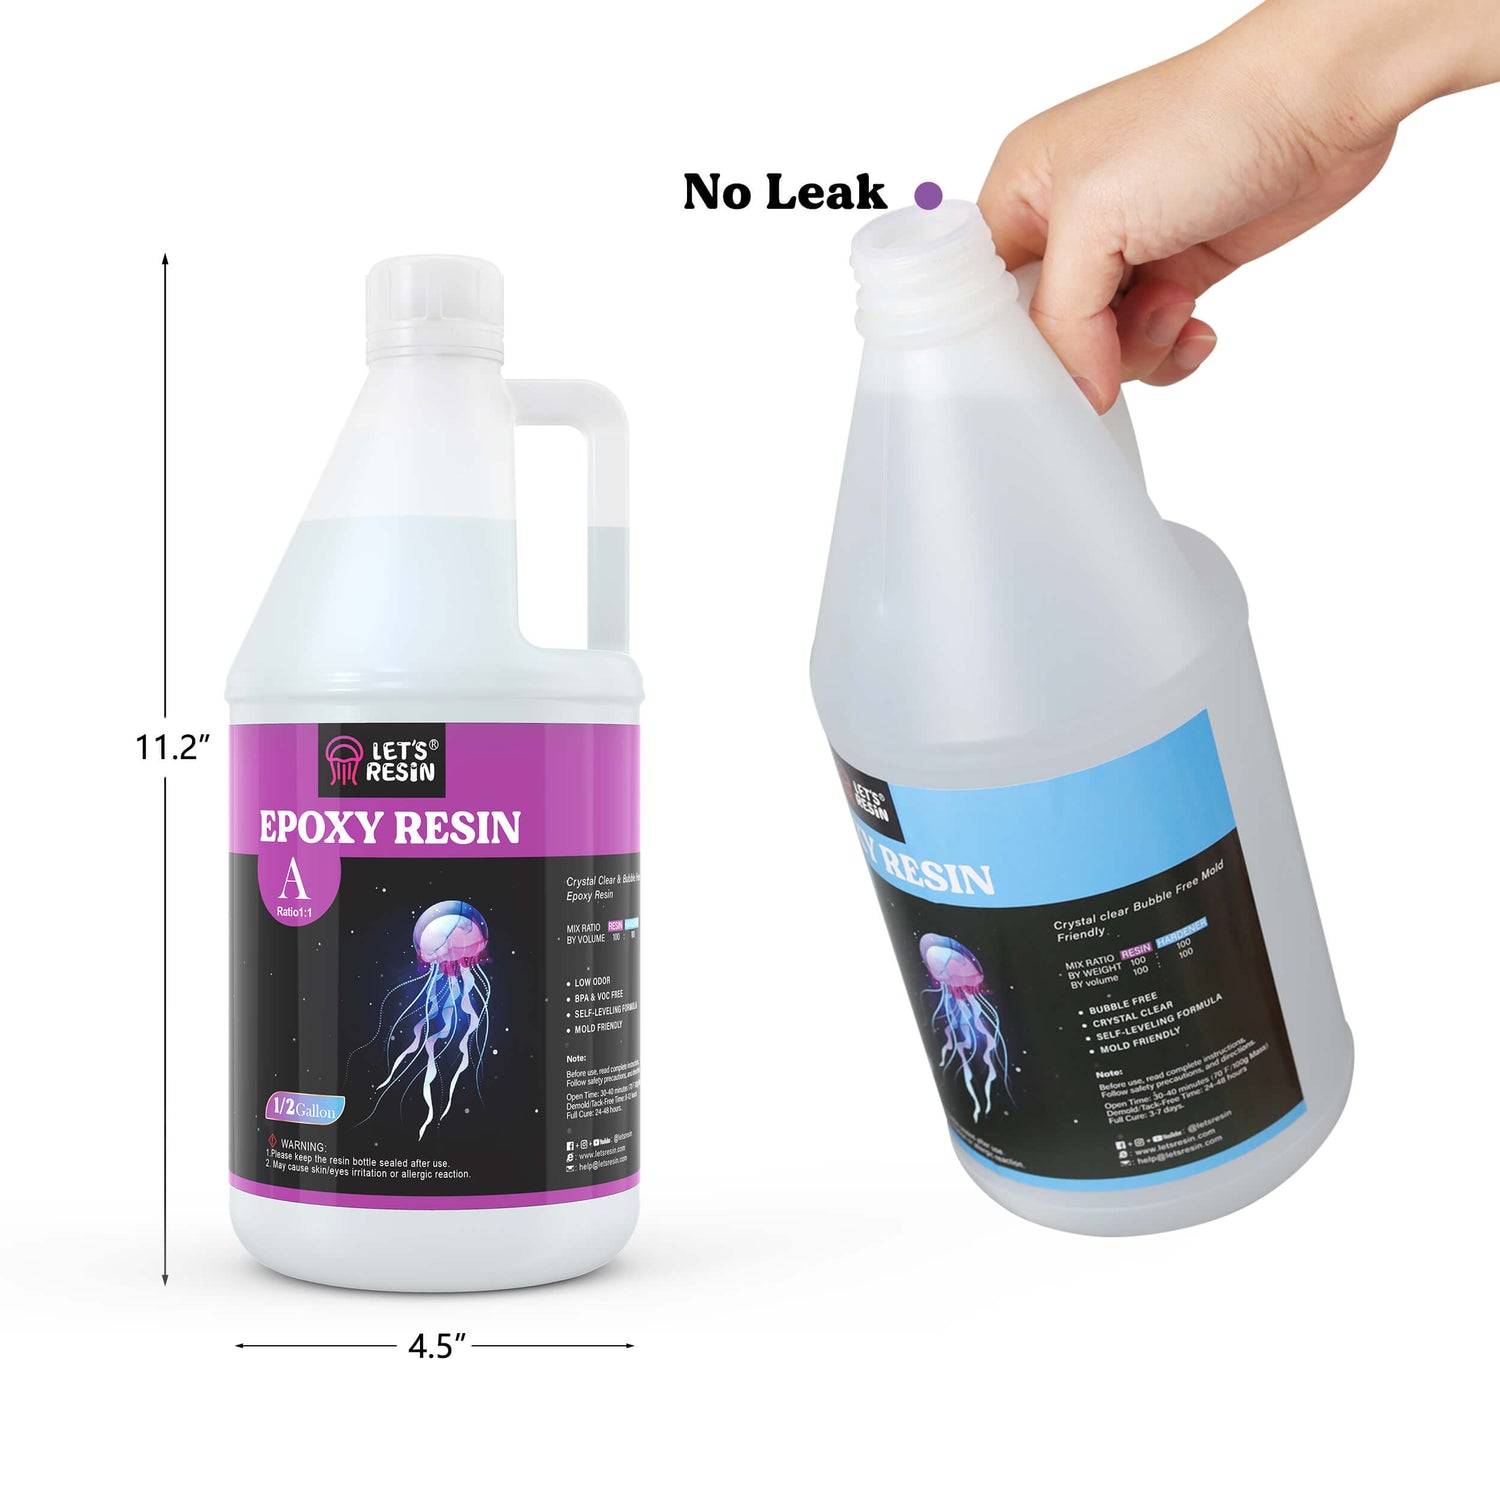 4 Gallon, Table Top & Art Clear Coating Epoxy Resin Kit